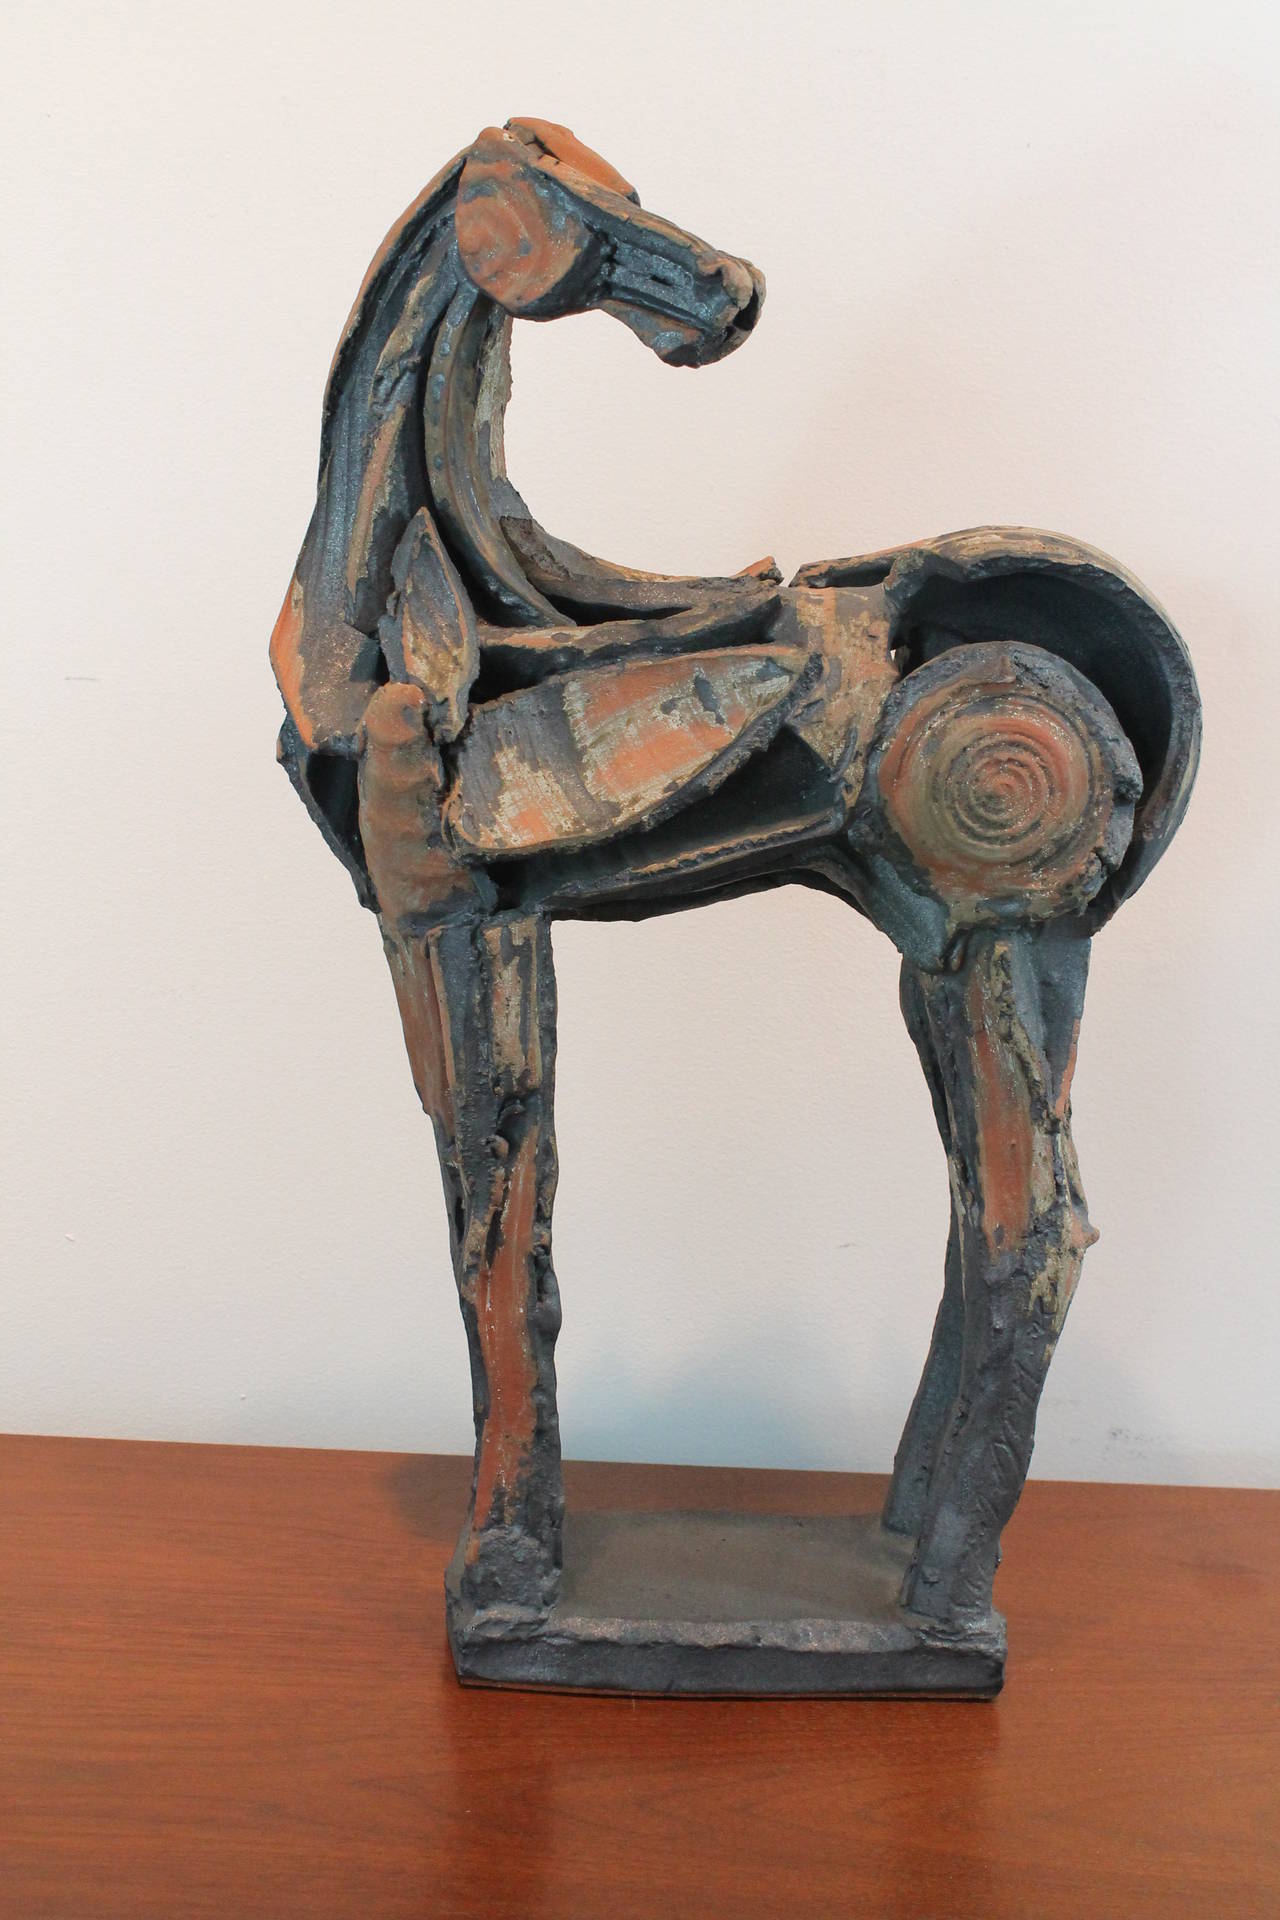 Exceptional and unusual form and construction on this Mid-Century Modernist horse sculpture.
Formed from an assemblage of ceramic shards.
Great from every angle.
Signed illegibly on the rear left leg.